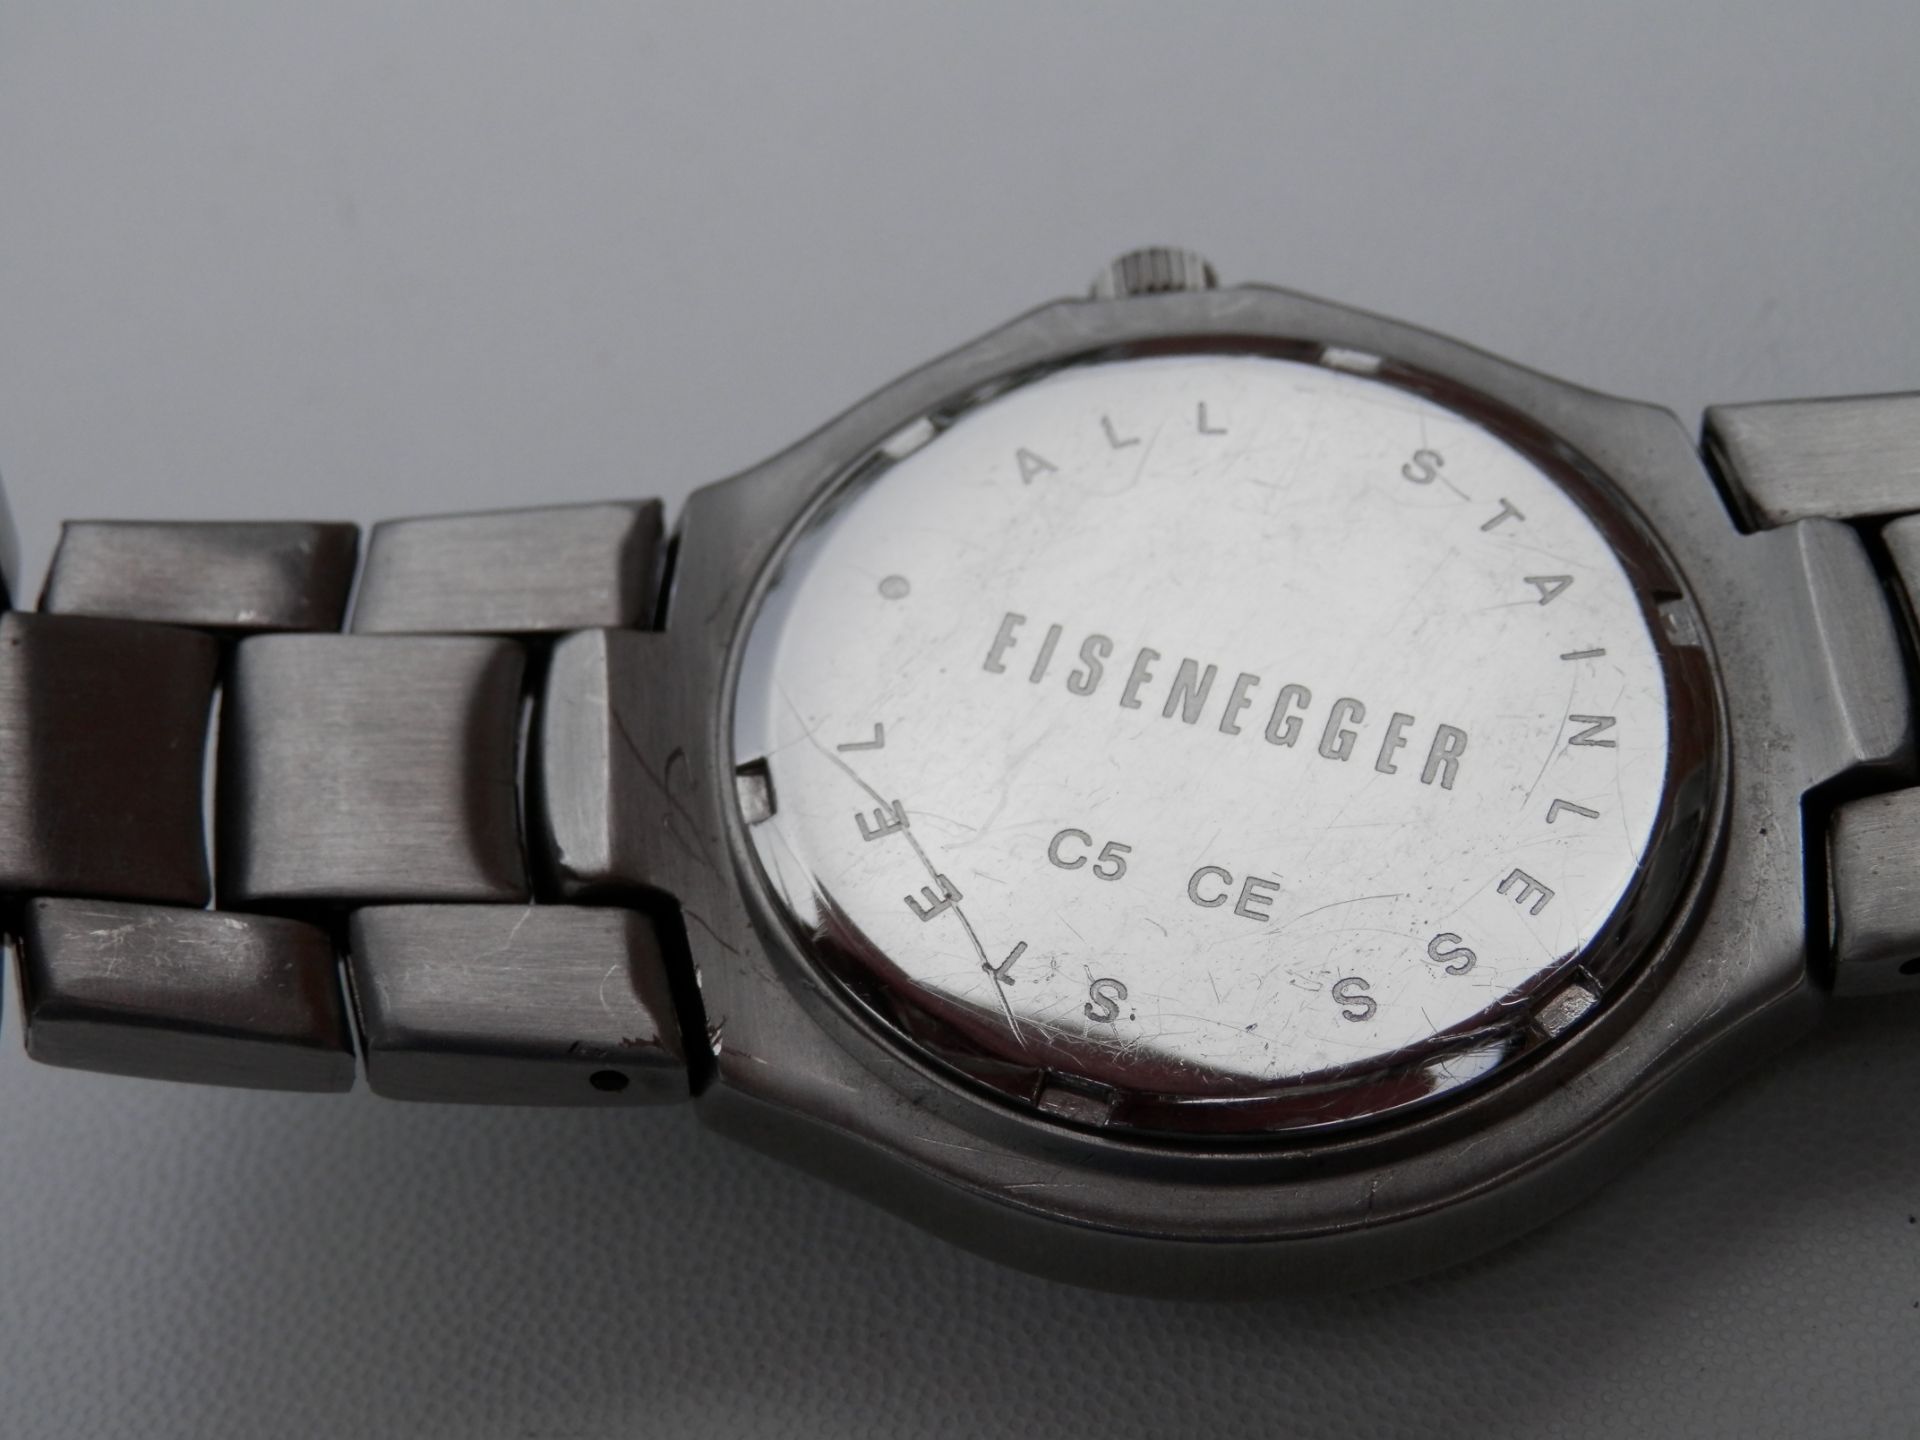 HEAVY FULL STAINLESS EISENEGGER 42MM QUARTZ 5ATM WR WATCH, WITH 8" STRAP. RRP £95 - Image 4 of 9